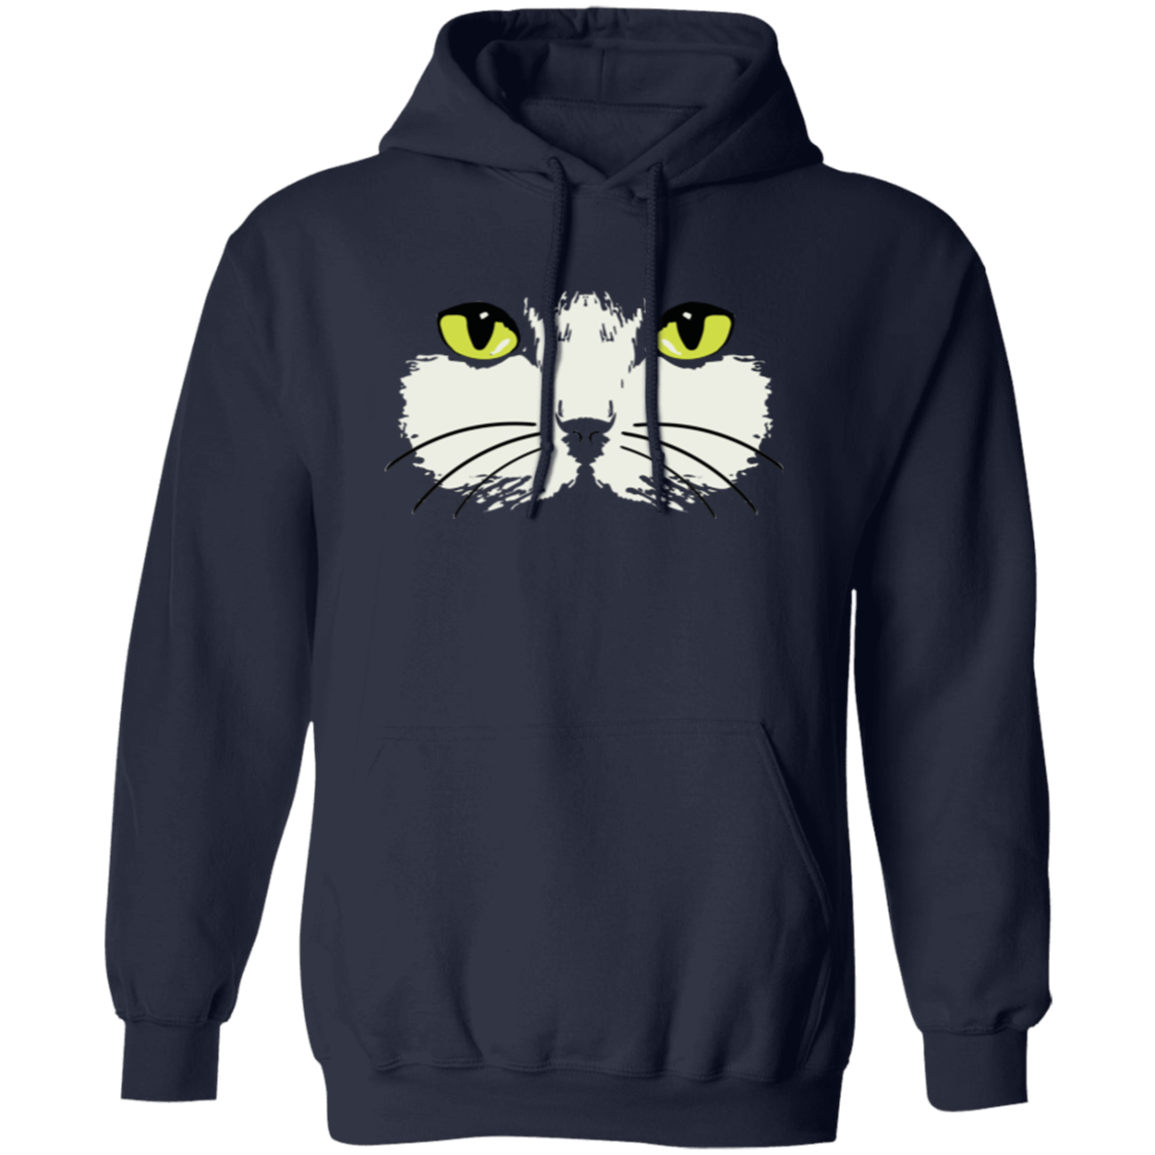 Gold Eyed Cat Face - T-shirts, Hoodies and Sweatshirts